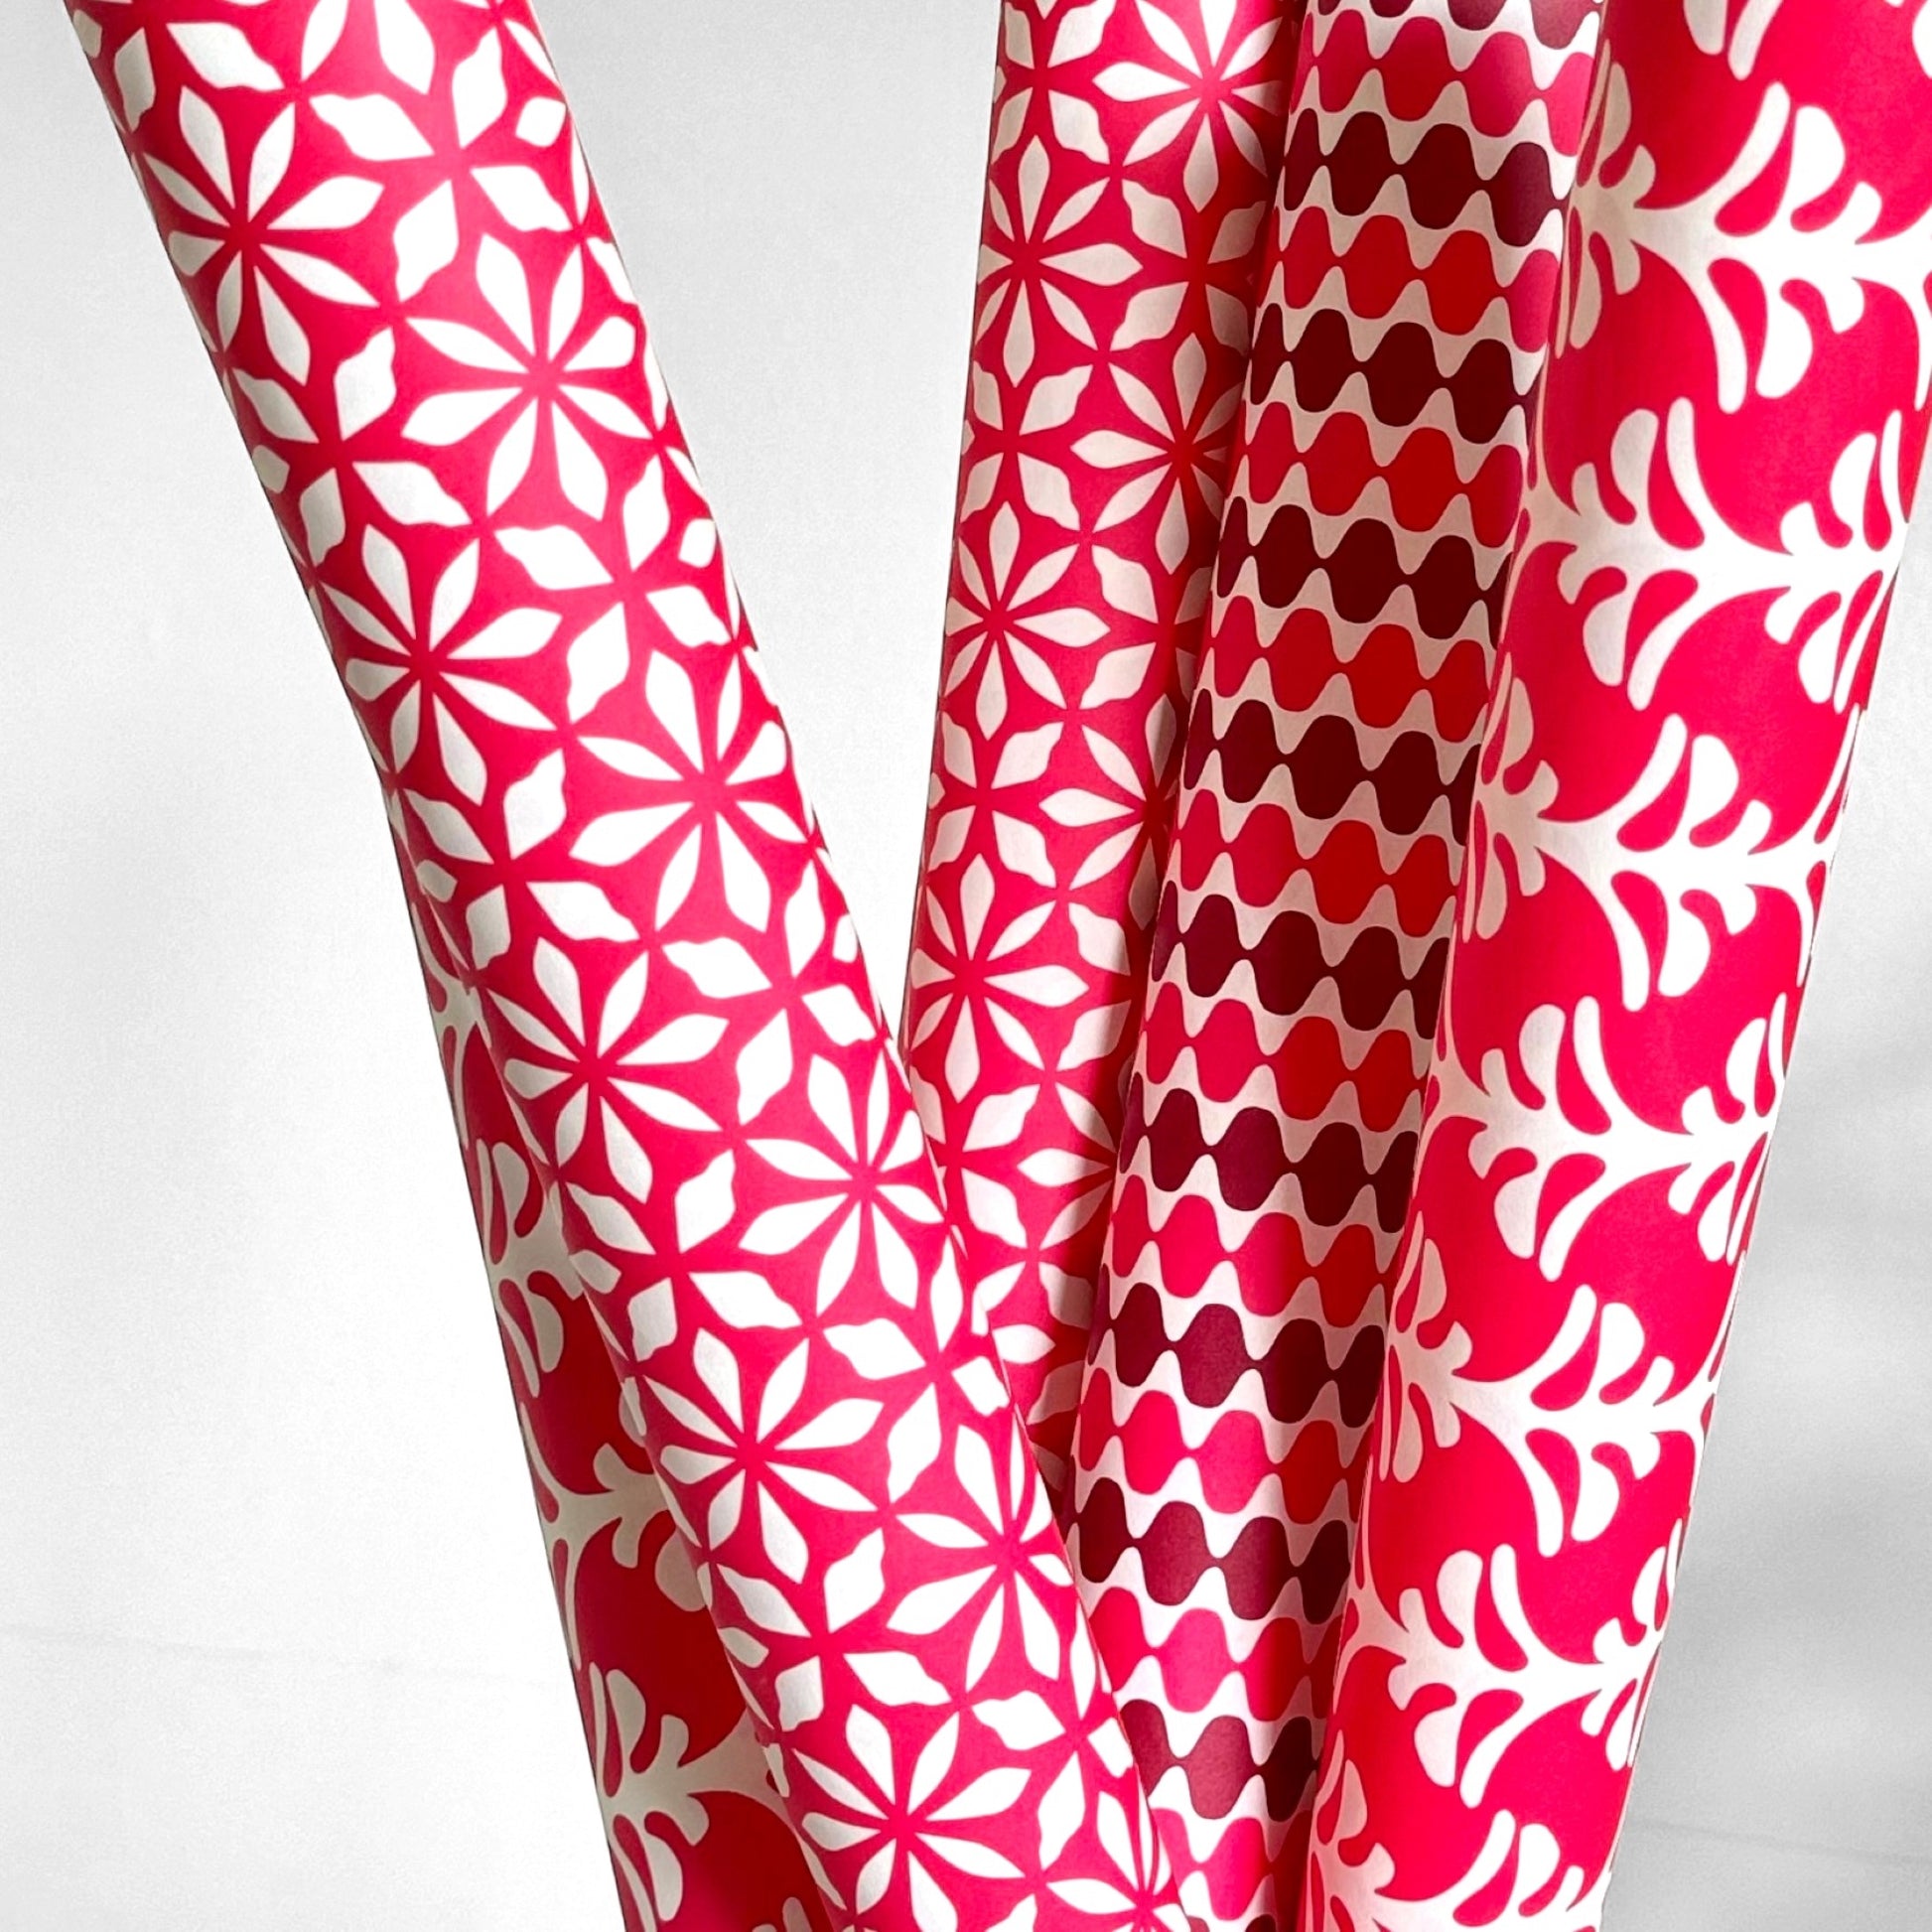 wrapping paper by Otto Editions with a cut-out flower design in white on a magenta pink background. Pictured wrapped rolled alongside other designs